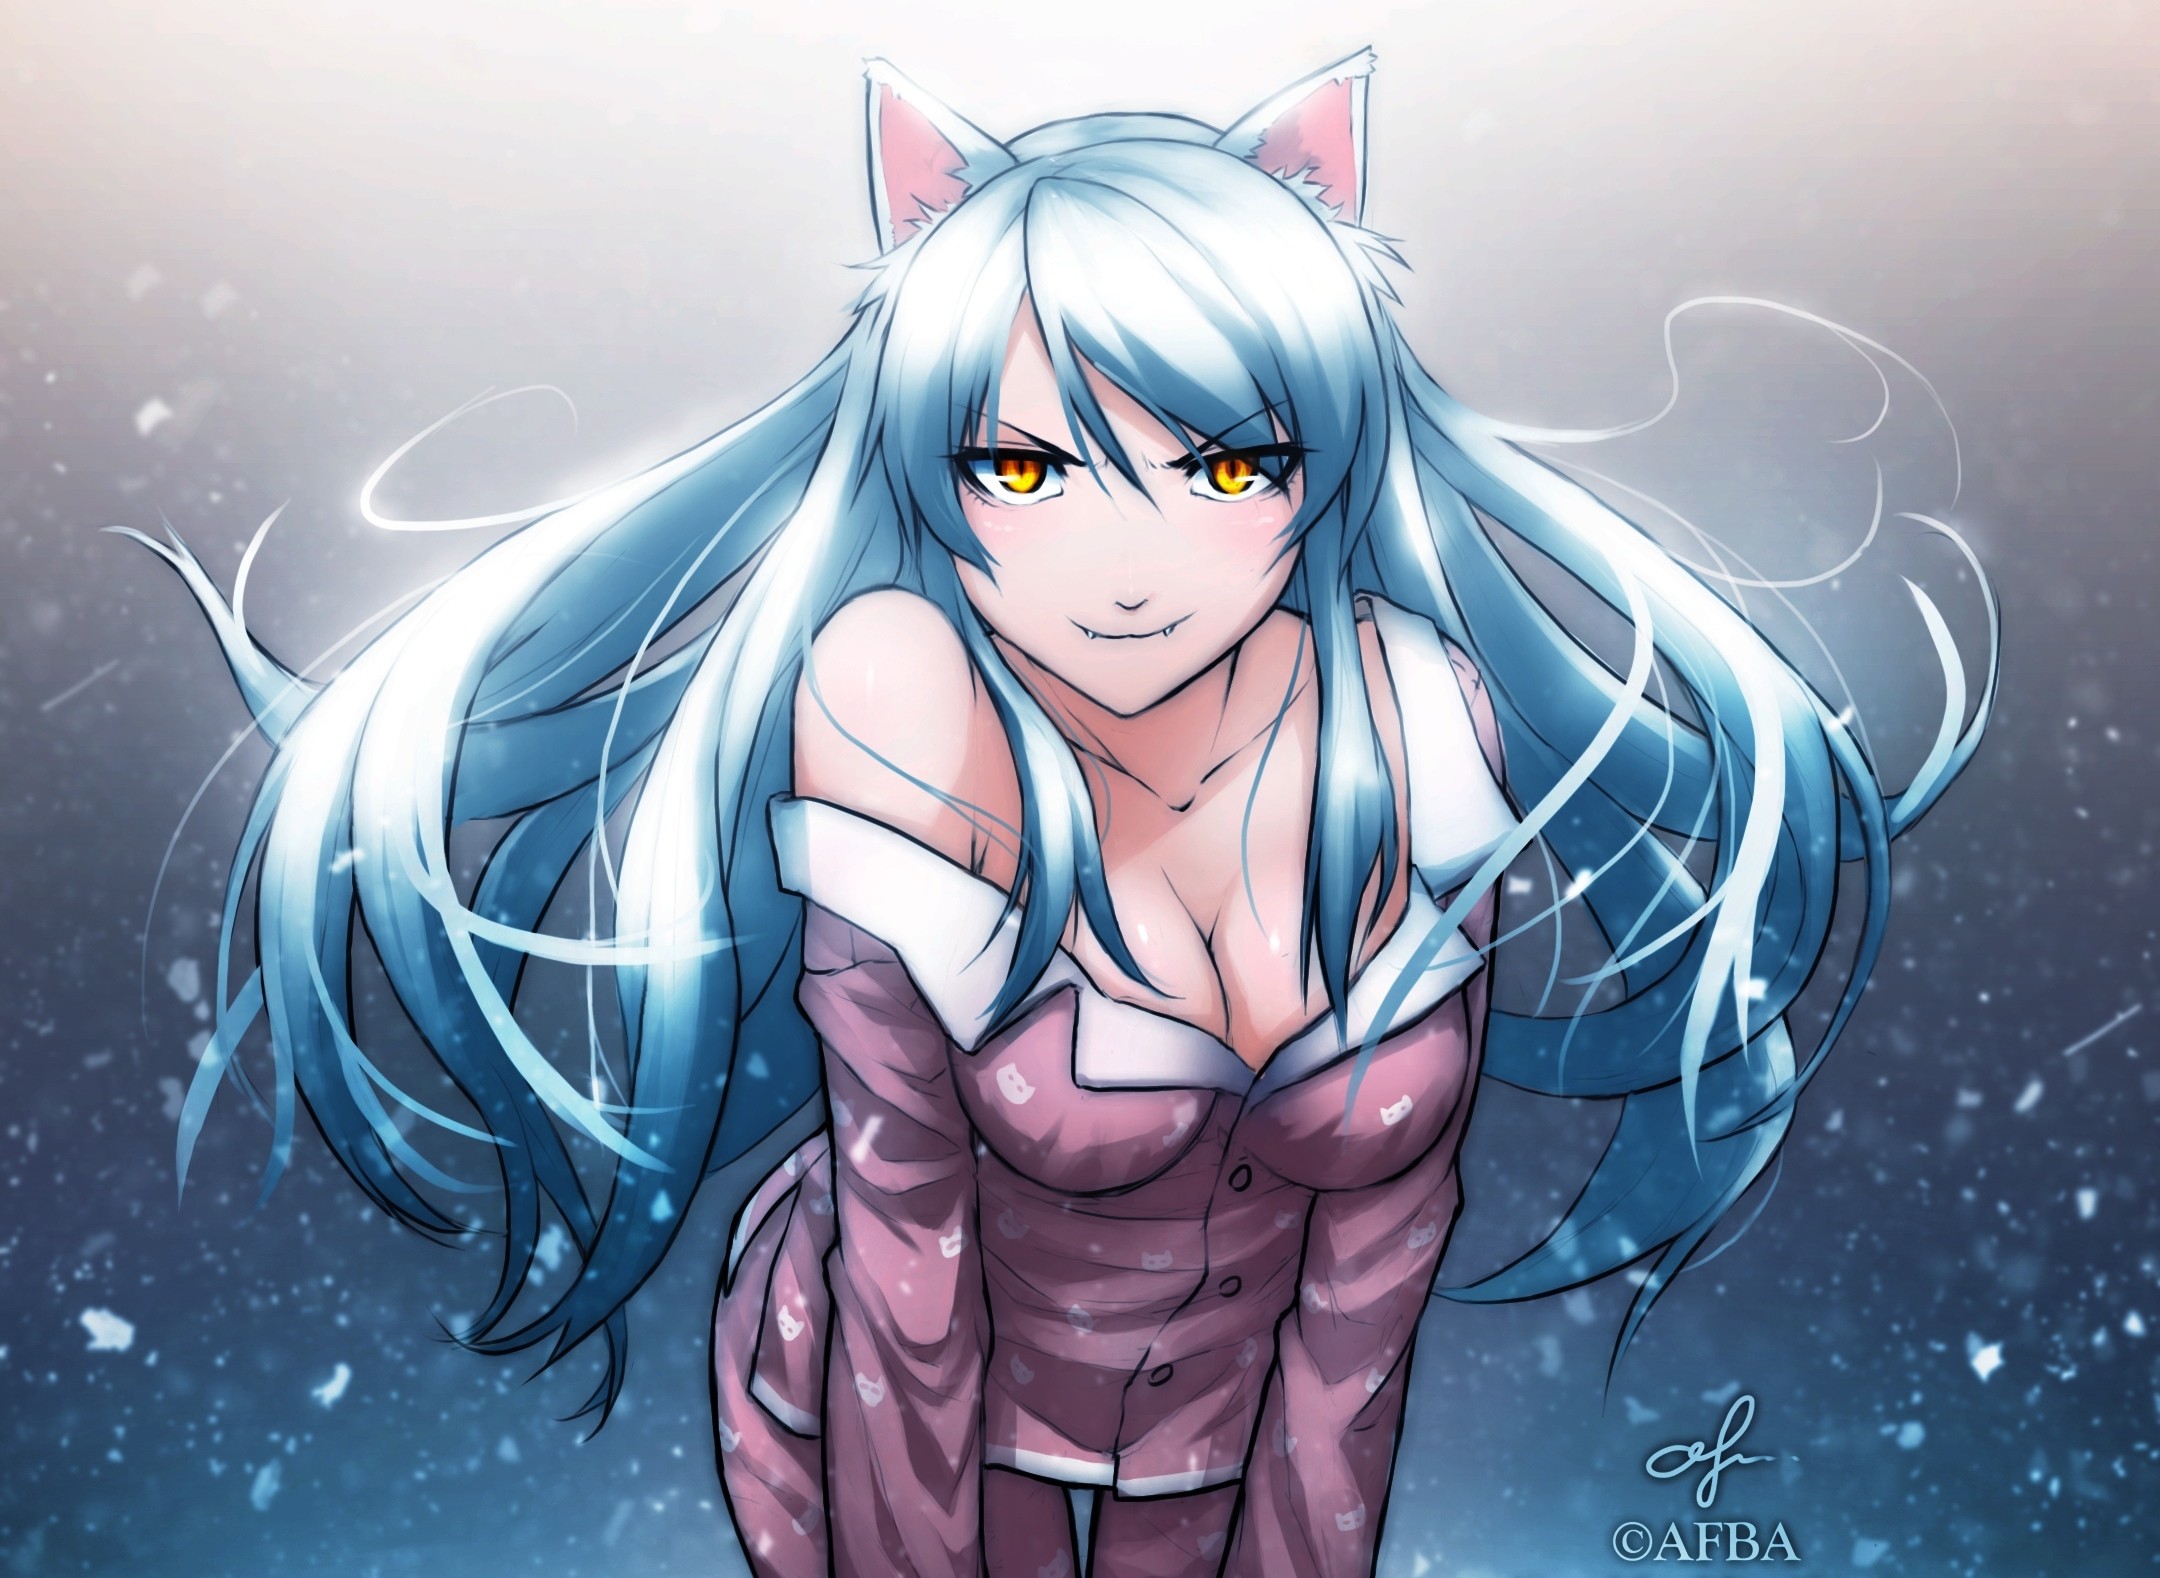 Neko Girl with Blue Hair from "Fruits Basket" Anime - wide 7